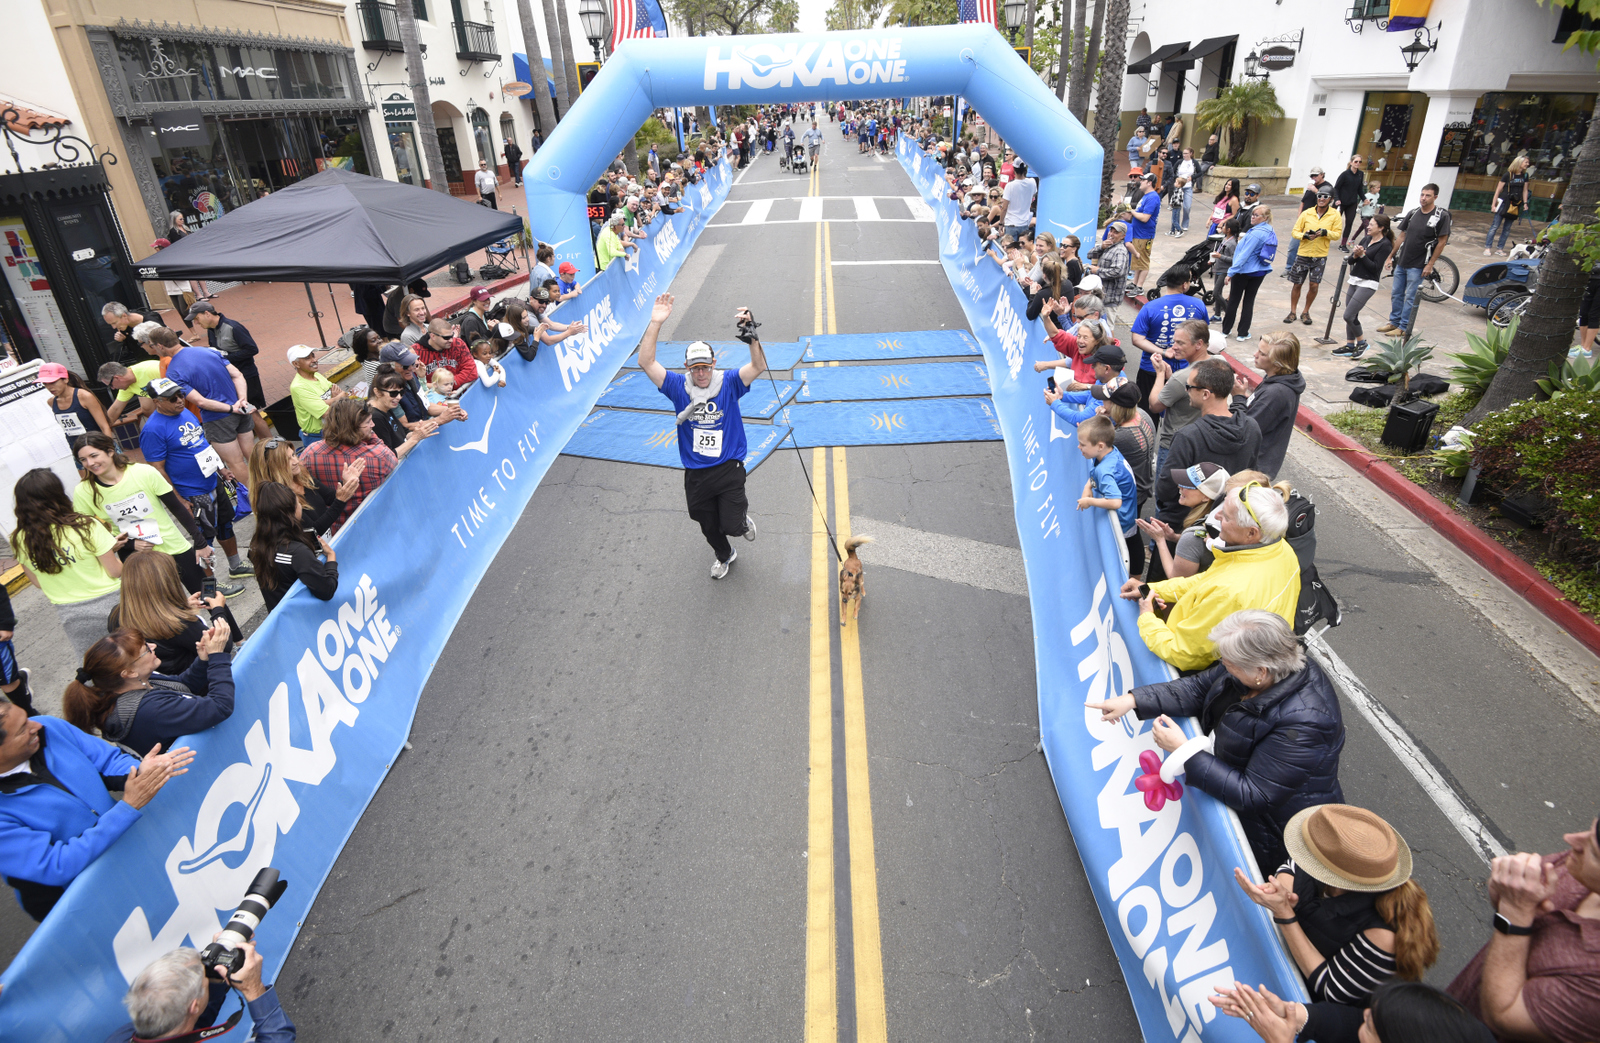 State Street Mile Record Breakers The Santa Barbara Independent